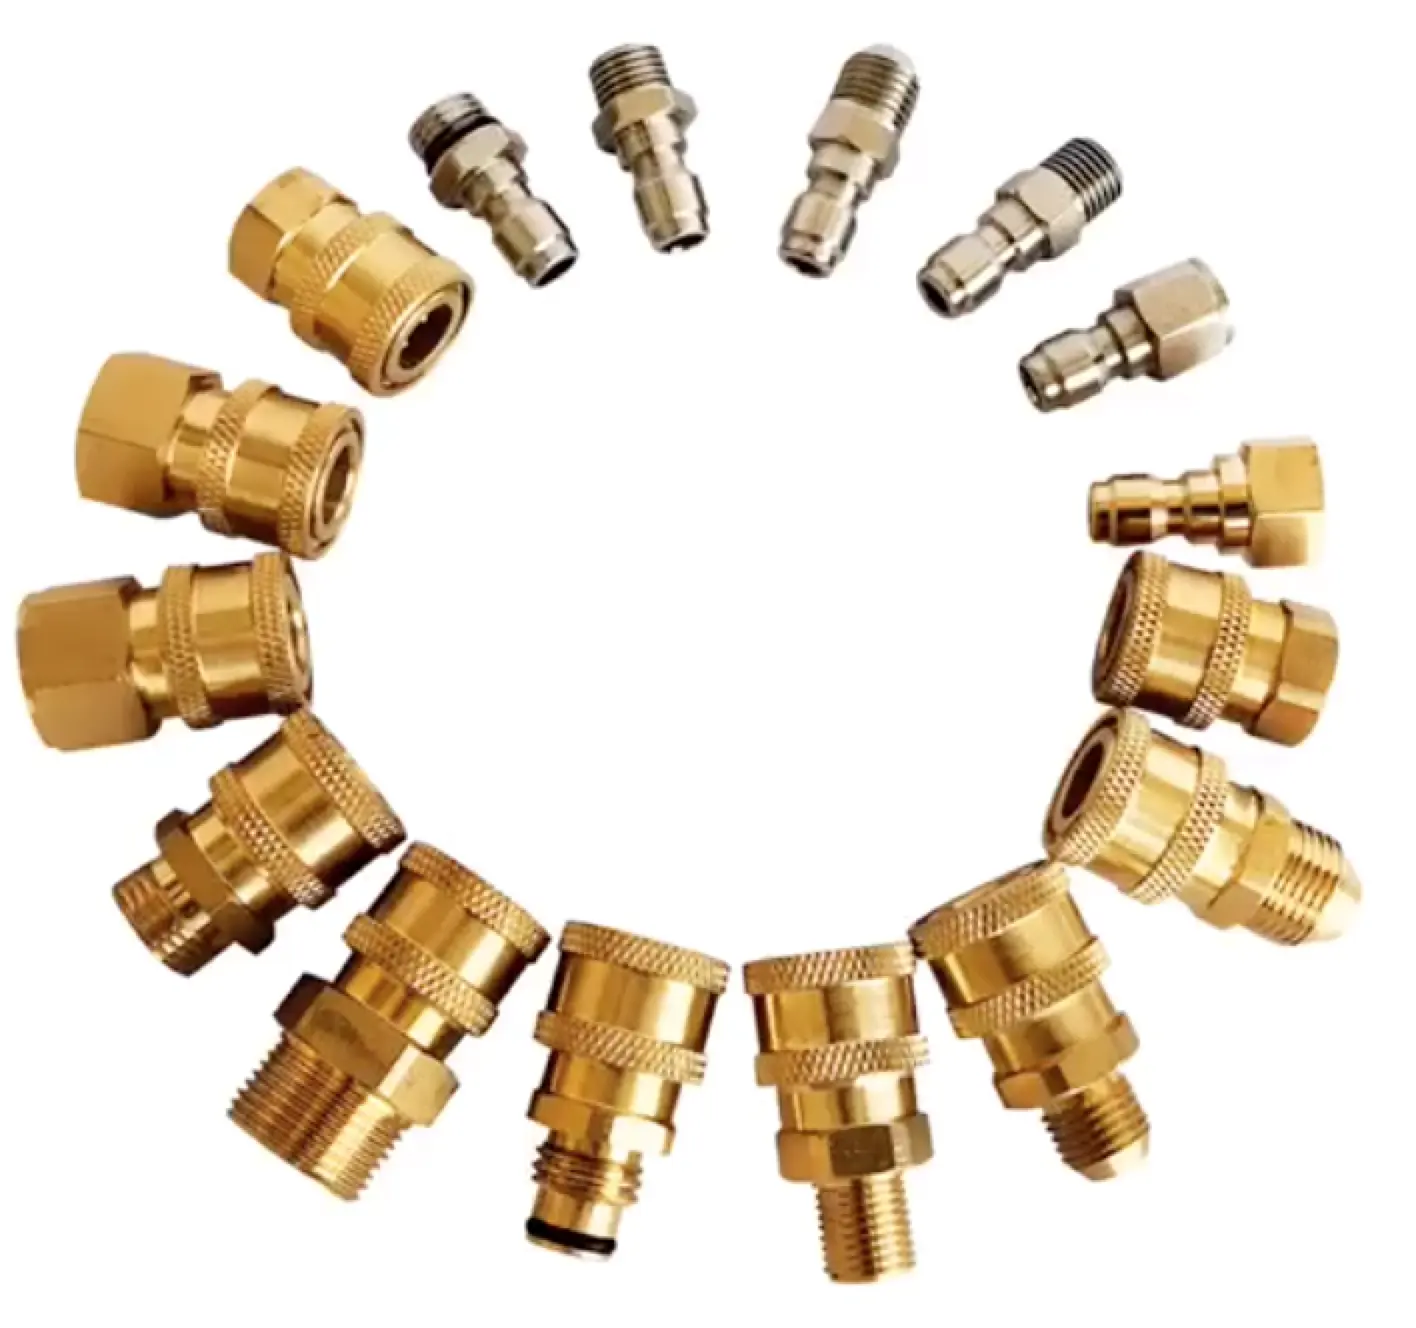 Pressure washer accessories copper adapter connectors 1/4" series